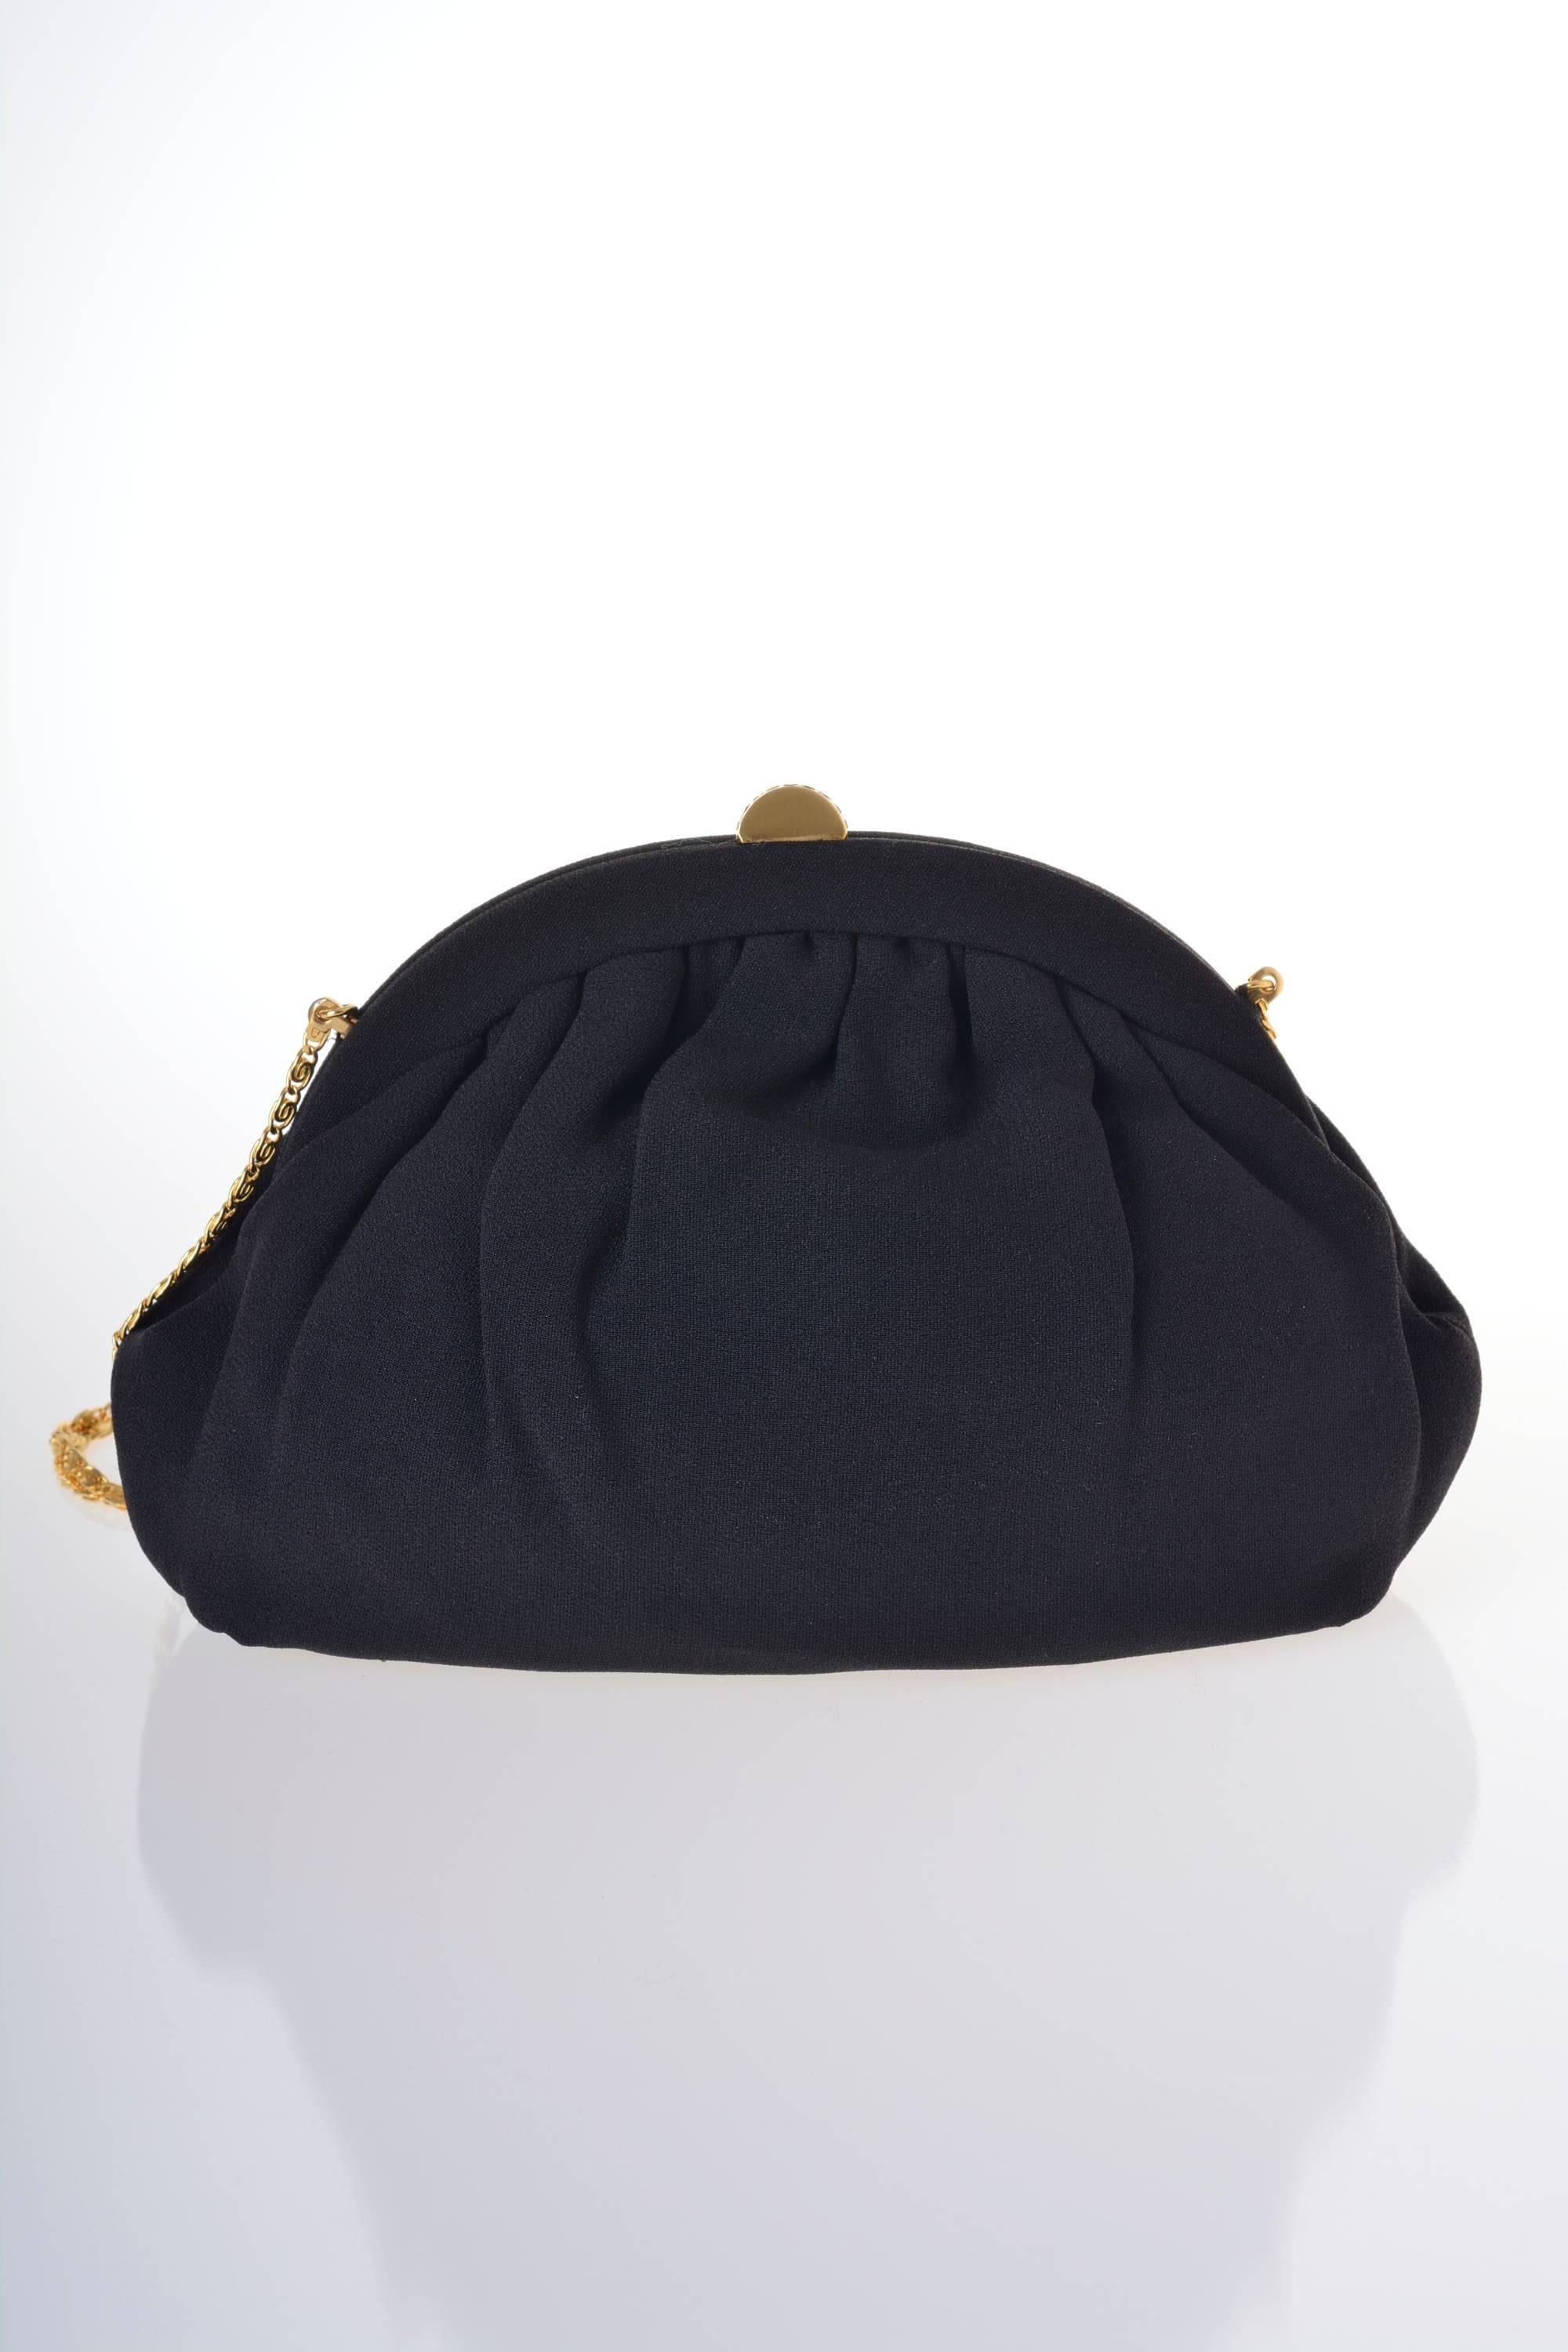 This gorgeous 1950s evening bag is in black silk crepe fabric. It has golden tone metal closure and long chain, is lined with cream satin and has a little pocket inside.

Good vintage condition

Measurements: 
Width 10 inch
Height 7 inch
Depth 3